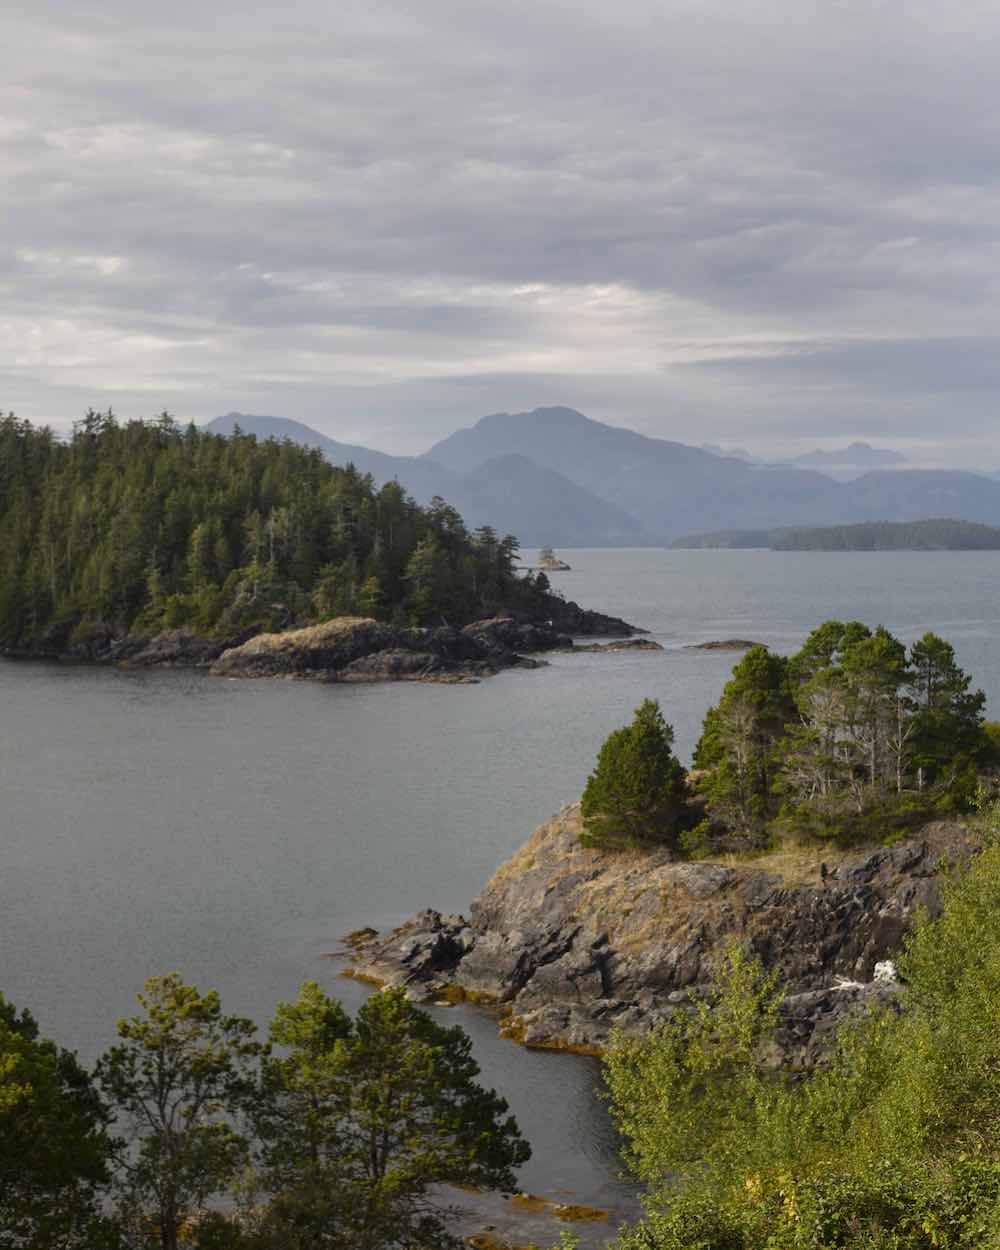 A view of a peaceful bay surrounded by coastal islands covered in coniferous trees. The sky is cloudy and greyish blue. There are blue mountain ranges in the background.